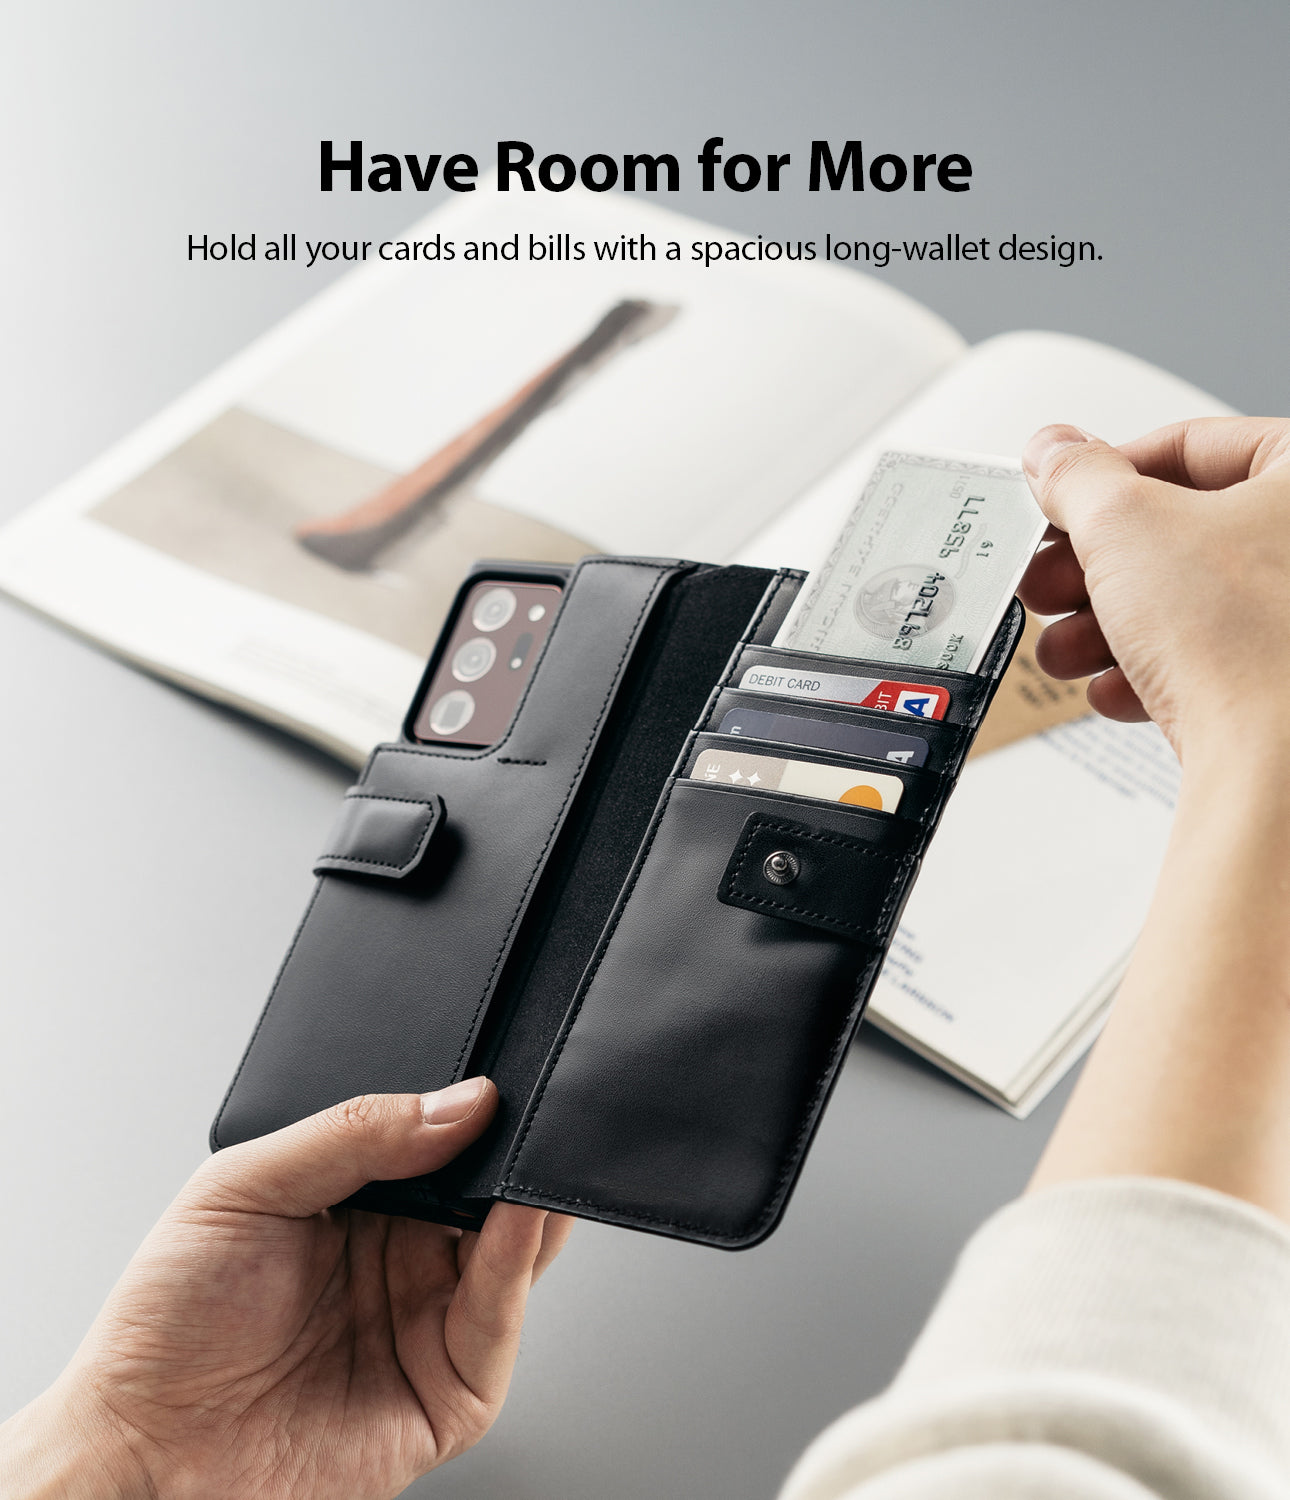 hold all your cards and bills with a spacious long-wallet design